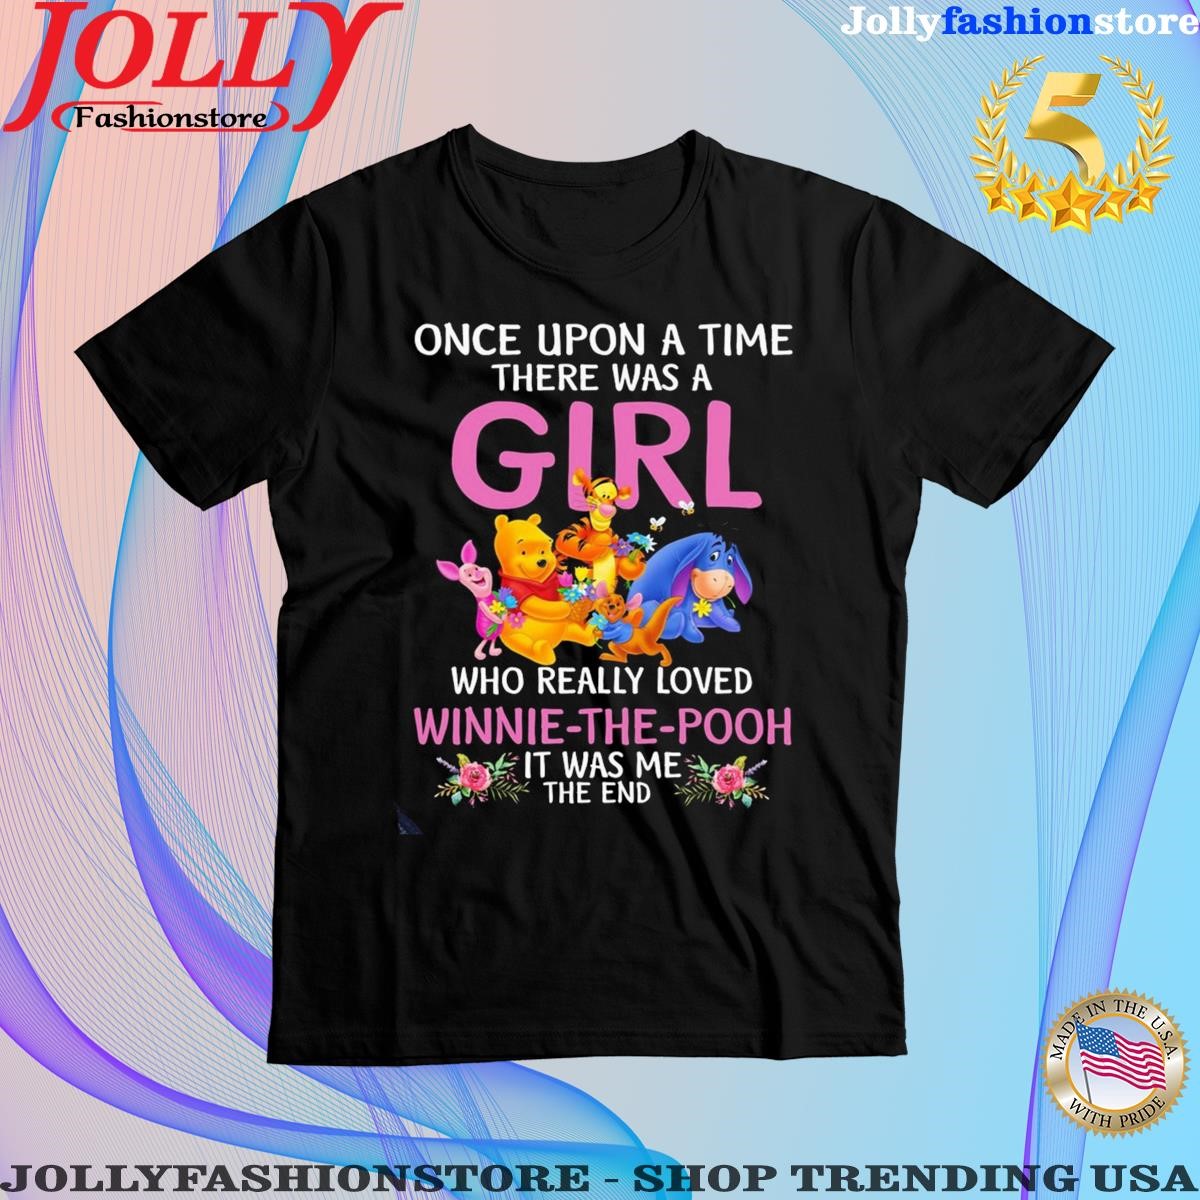 Pooh and Friends once upon a time there was a Girl who really loved Winnie the Pooh it was me the end shirt